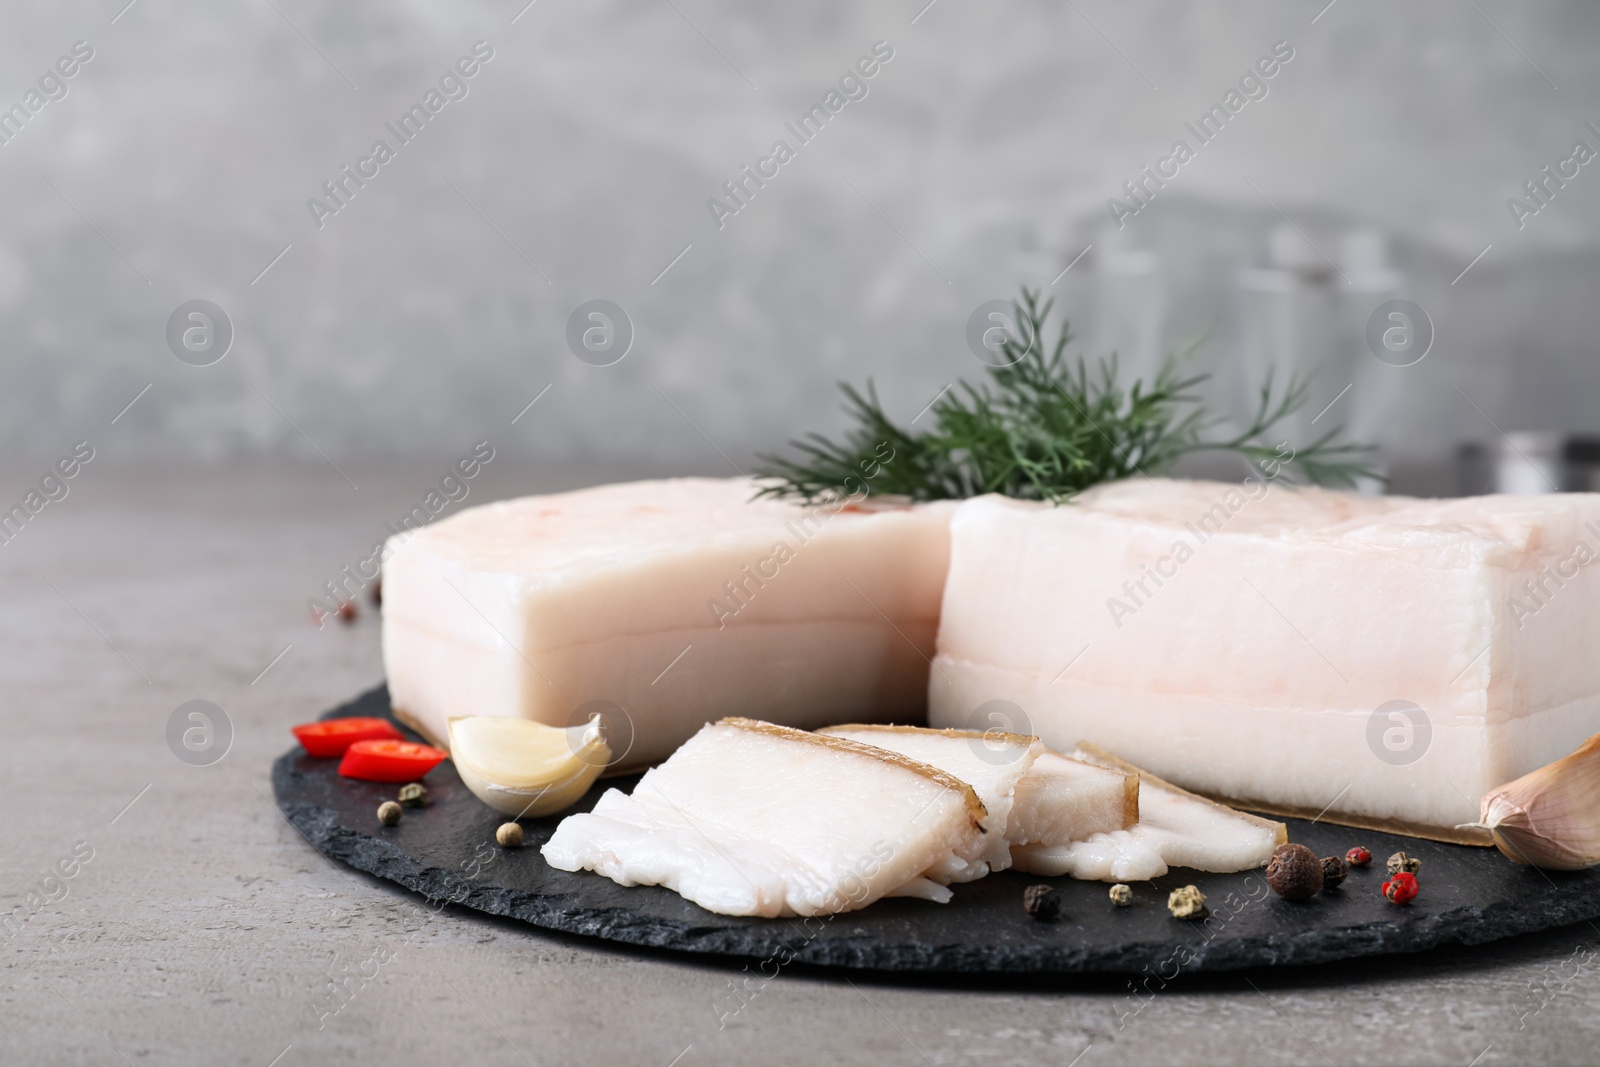 Photo of Pork fatback with spices served on grey table